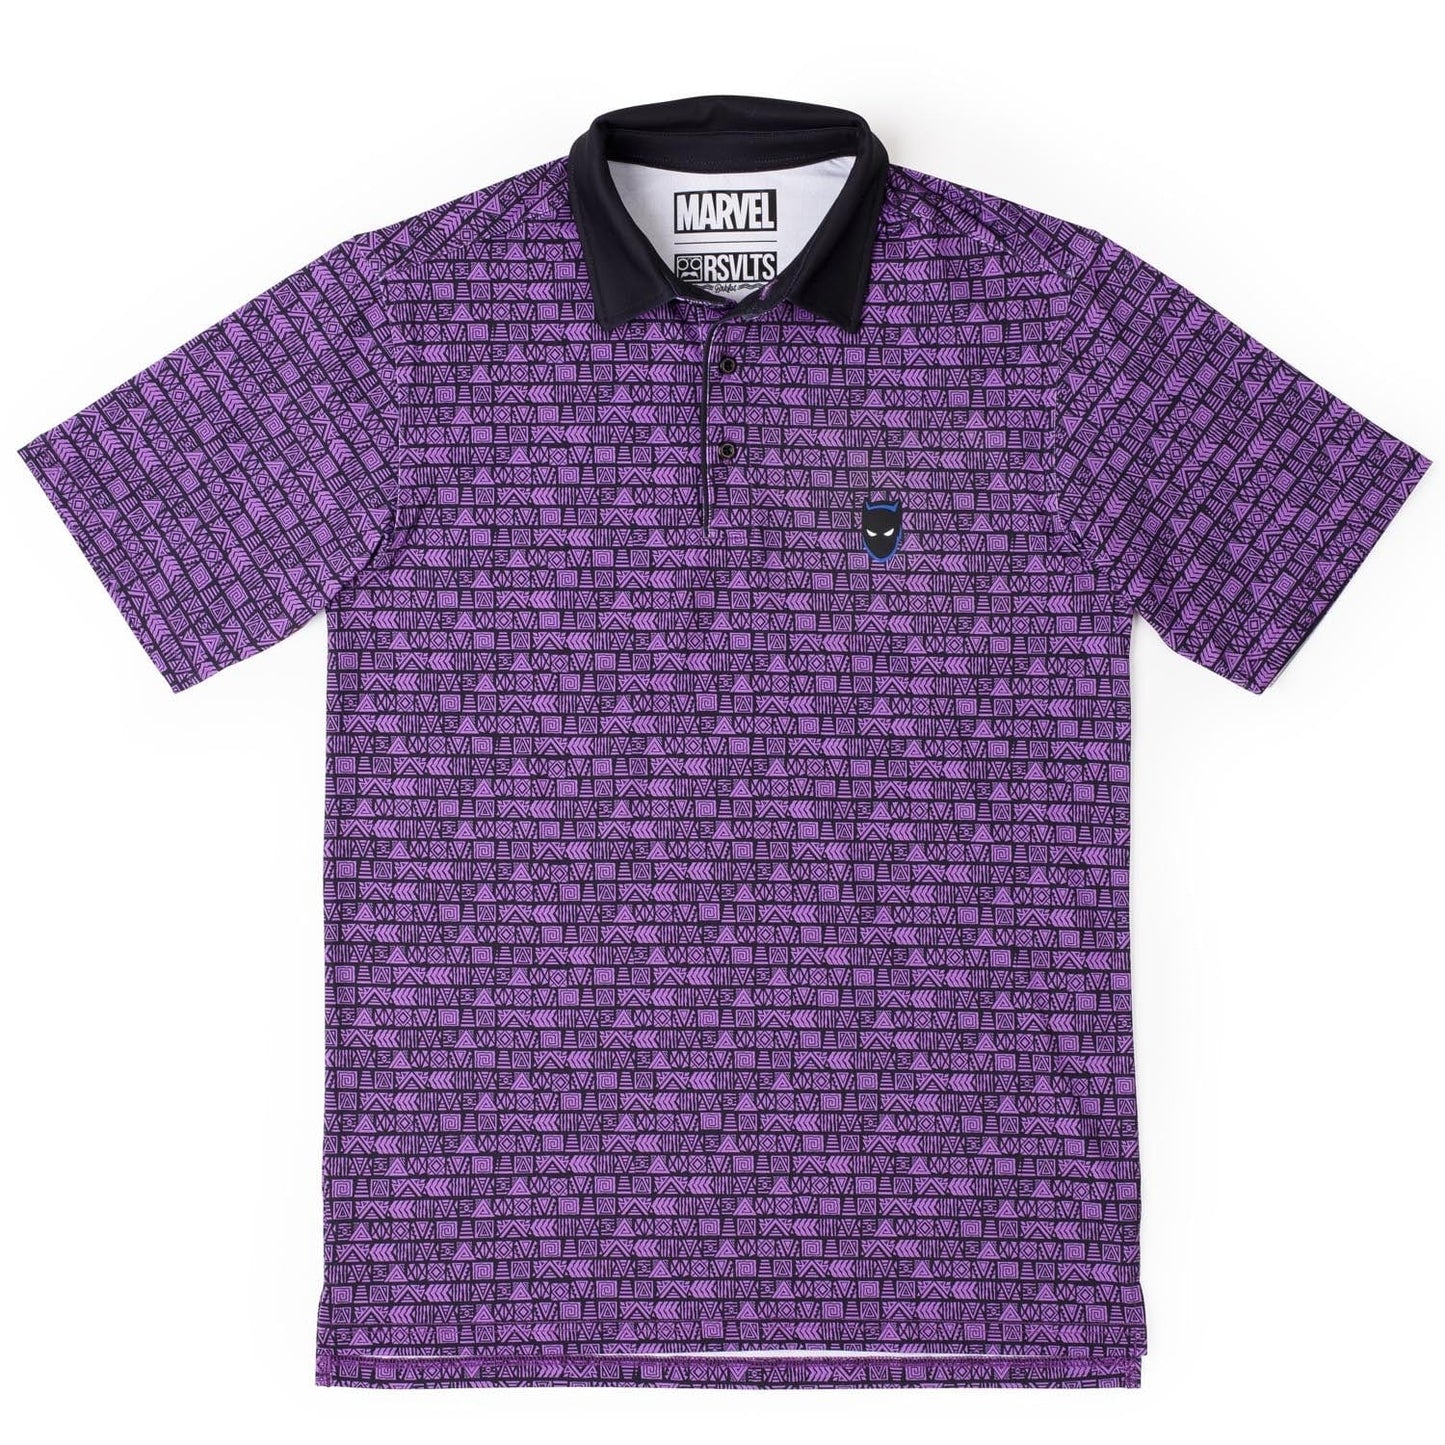 Black Panther 'Wakanda Forever' Marvel Performance Polo Shirt by RSVLTS